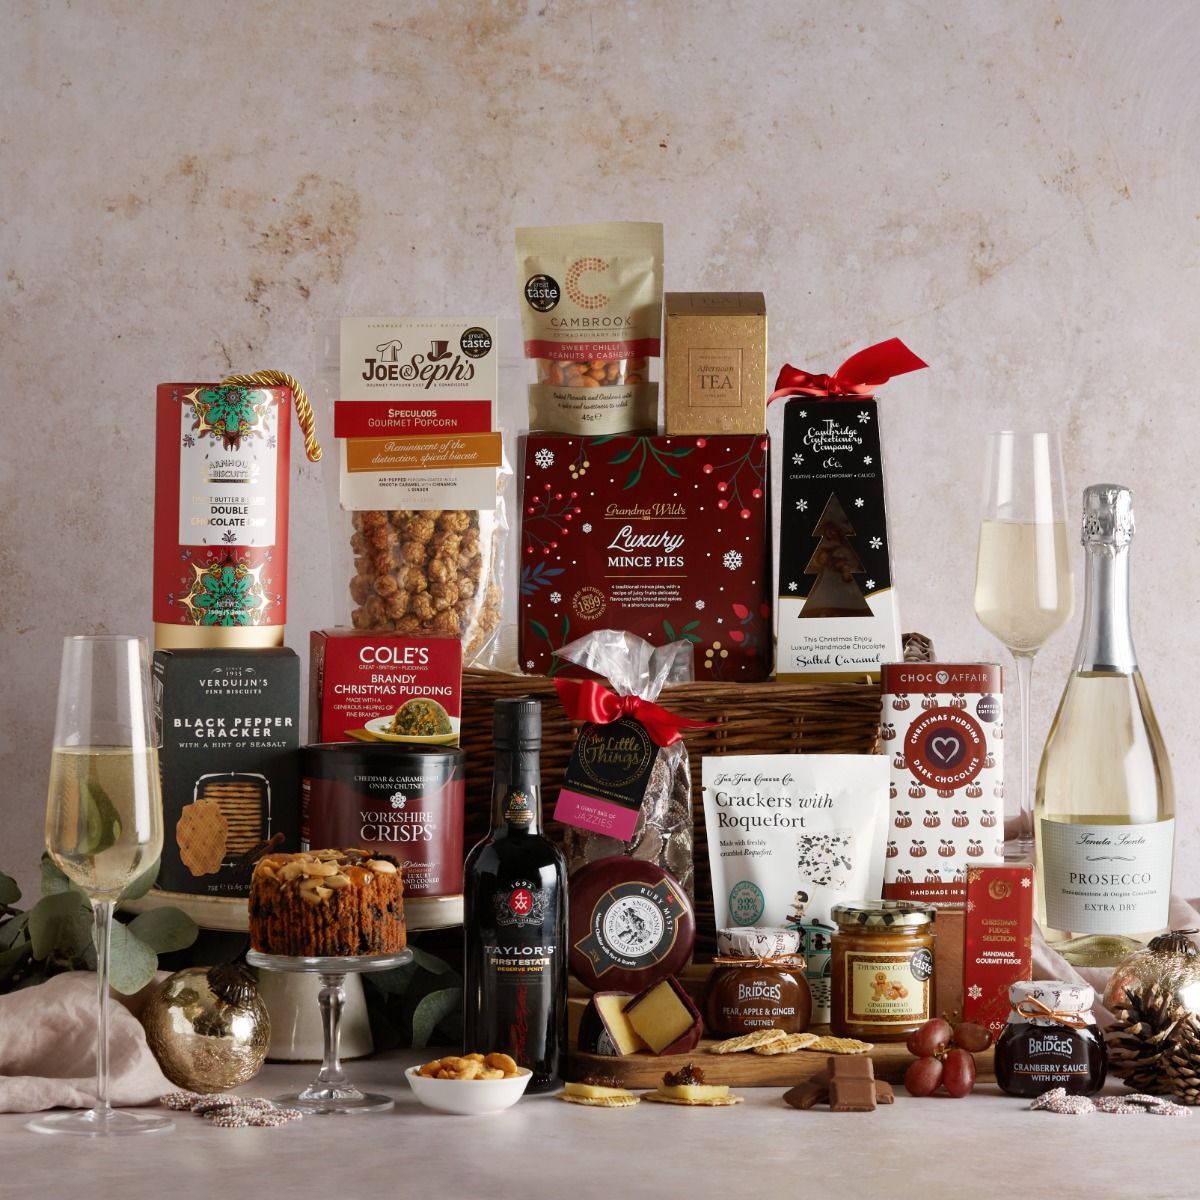 The Family Christmas Hamper with contents on display and wicker basket